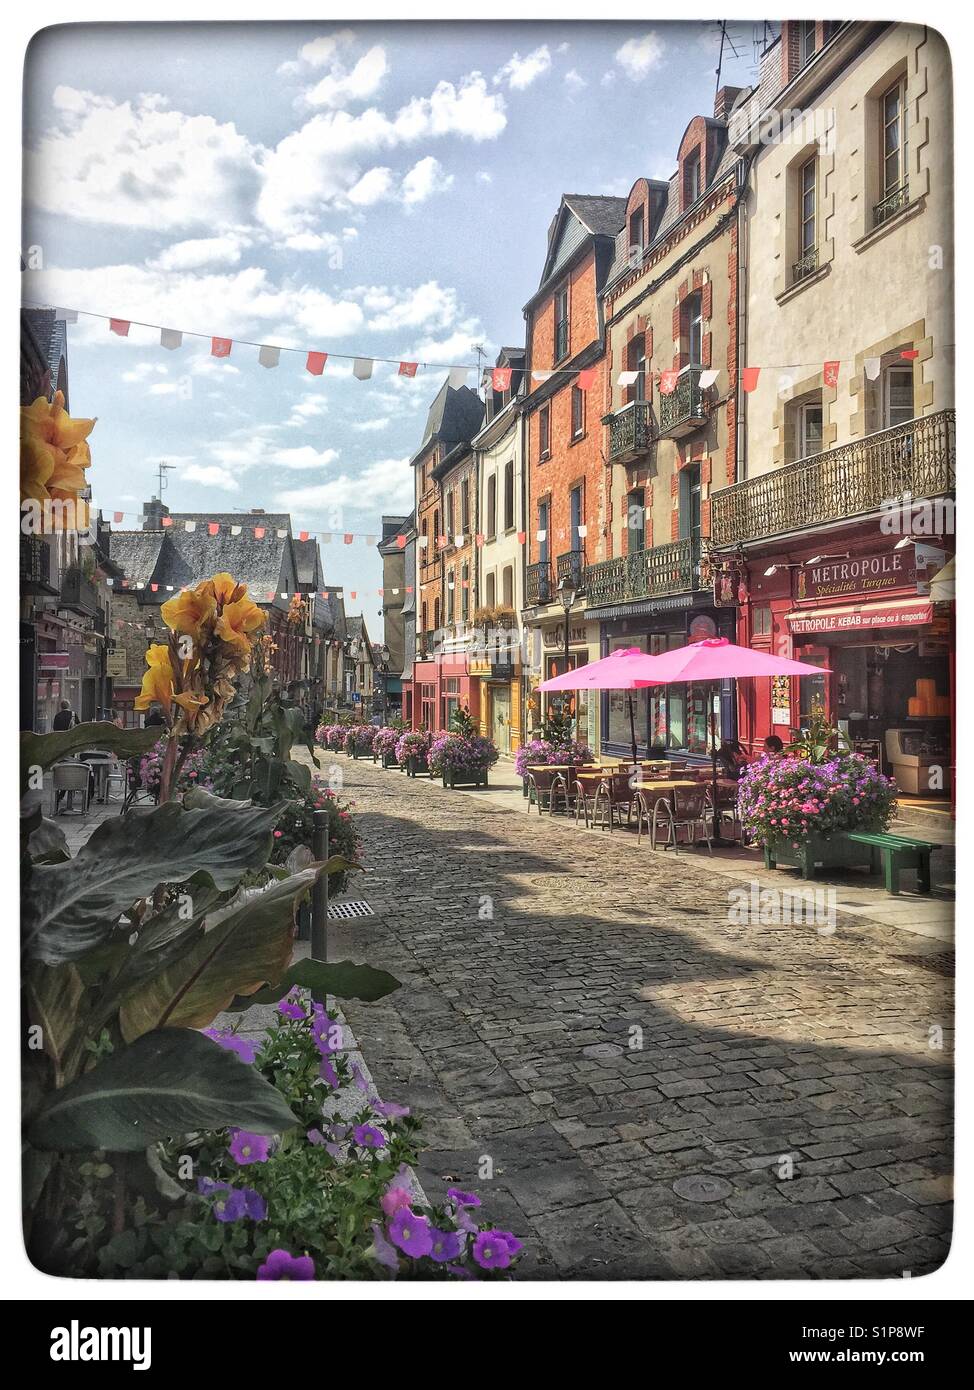 VITRE, BRITTANY, FRANCE. August 28th 2017. The beautiful Rue de la Poterie is just one of Vitre's stunning old streets, which explains why the town is increasingly popular with summer tourists. Stock Photo